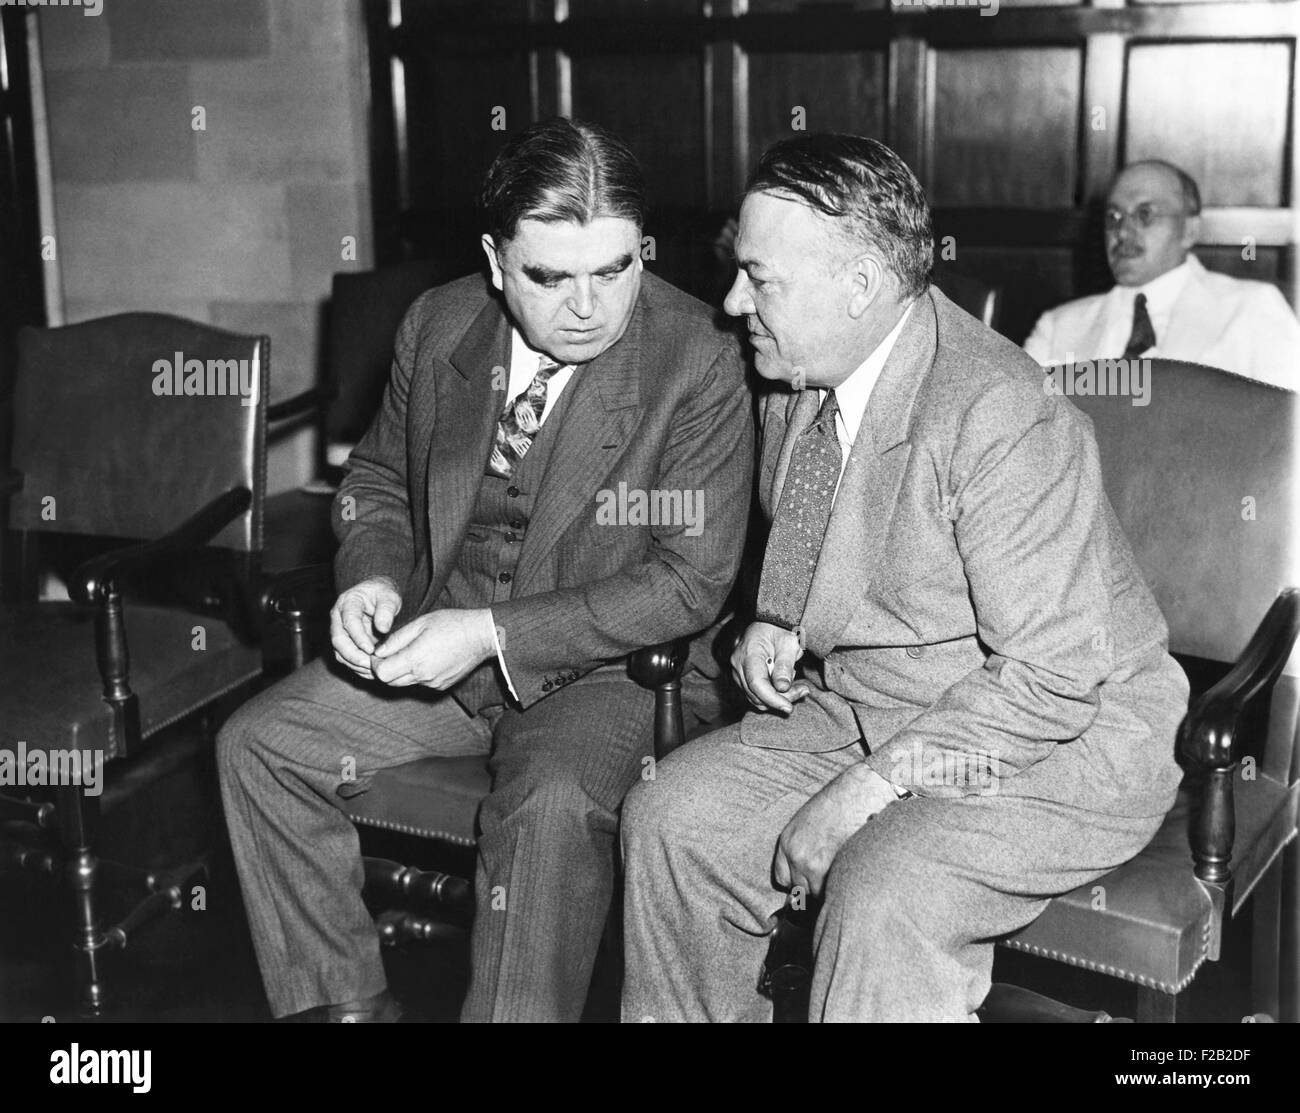 Hugh Johnson, NRA administrator with John L. Lewis (left) President of the United Mine Workers. On Sept. 12, 1933 they were at the NRA coal 'Code' hearing which would establish 'fair practices' and 'set prices' to reduce competition and raise wages and prices. (CSU 2015 7 386) Stock Photo